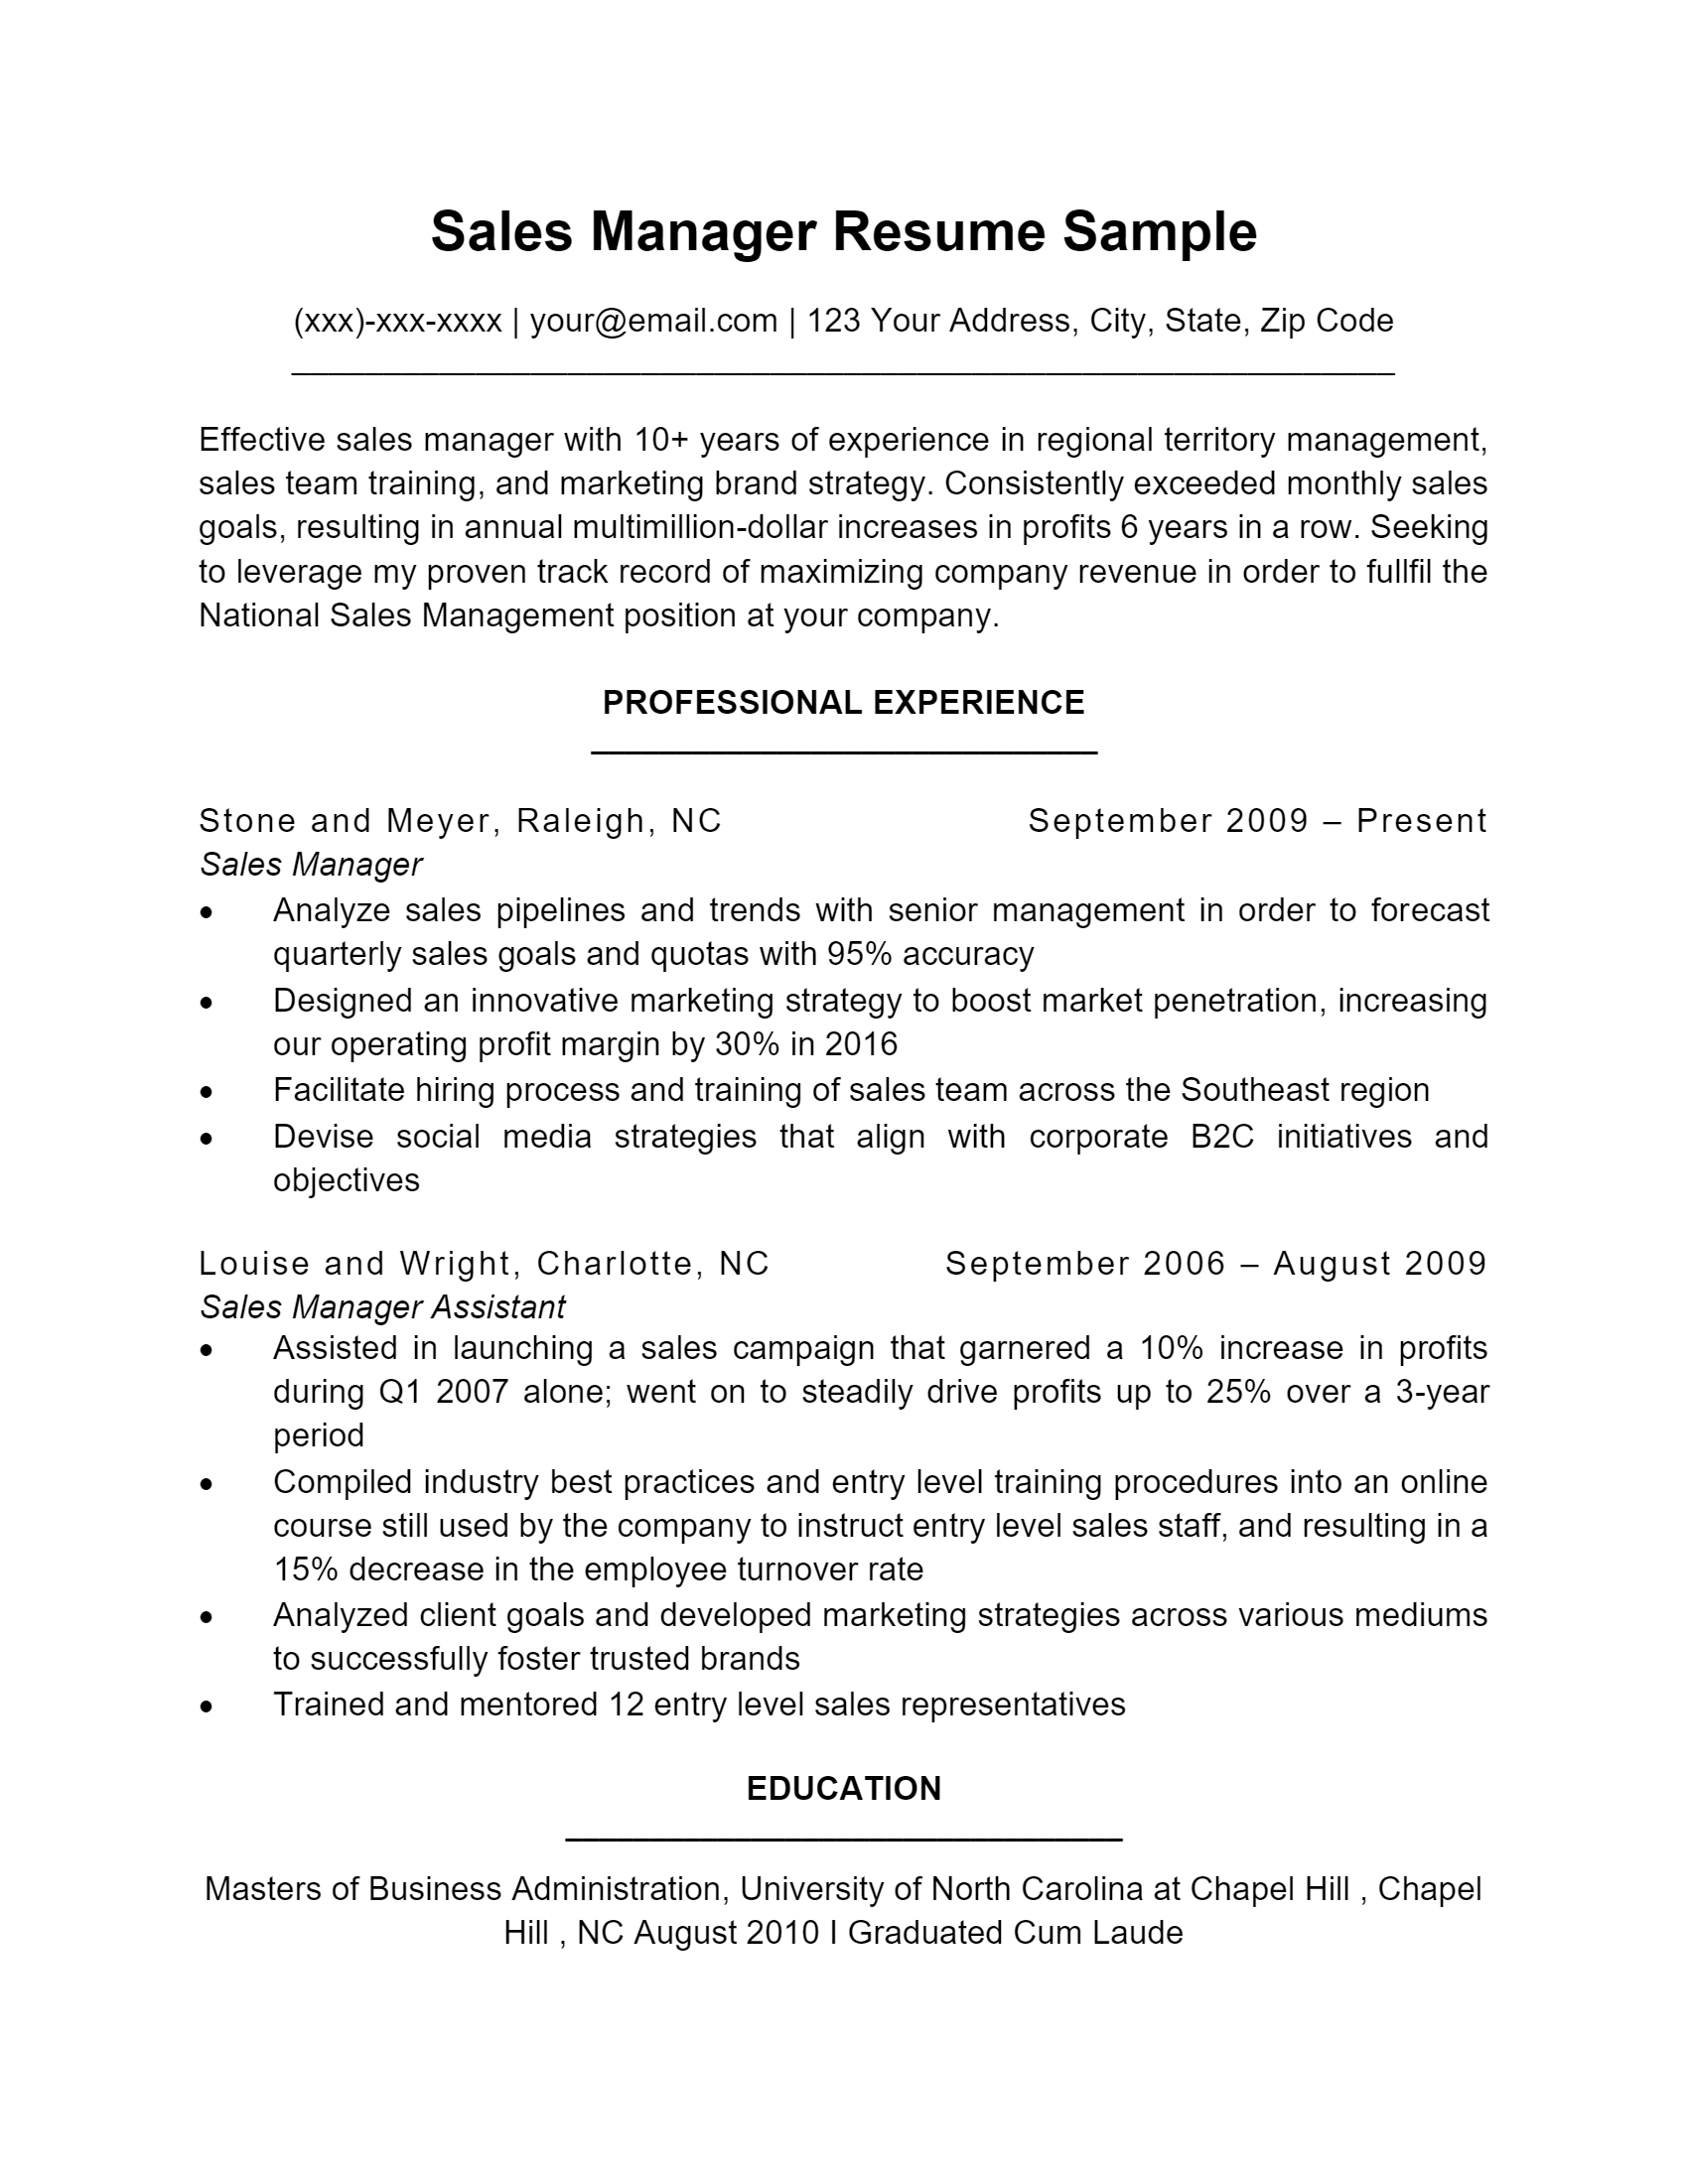 Sales Manager Resume .Docx (Word)